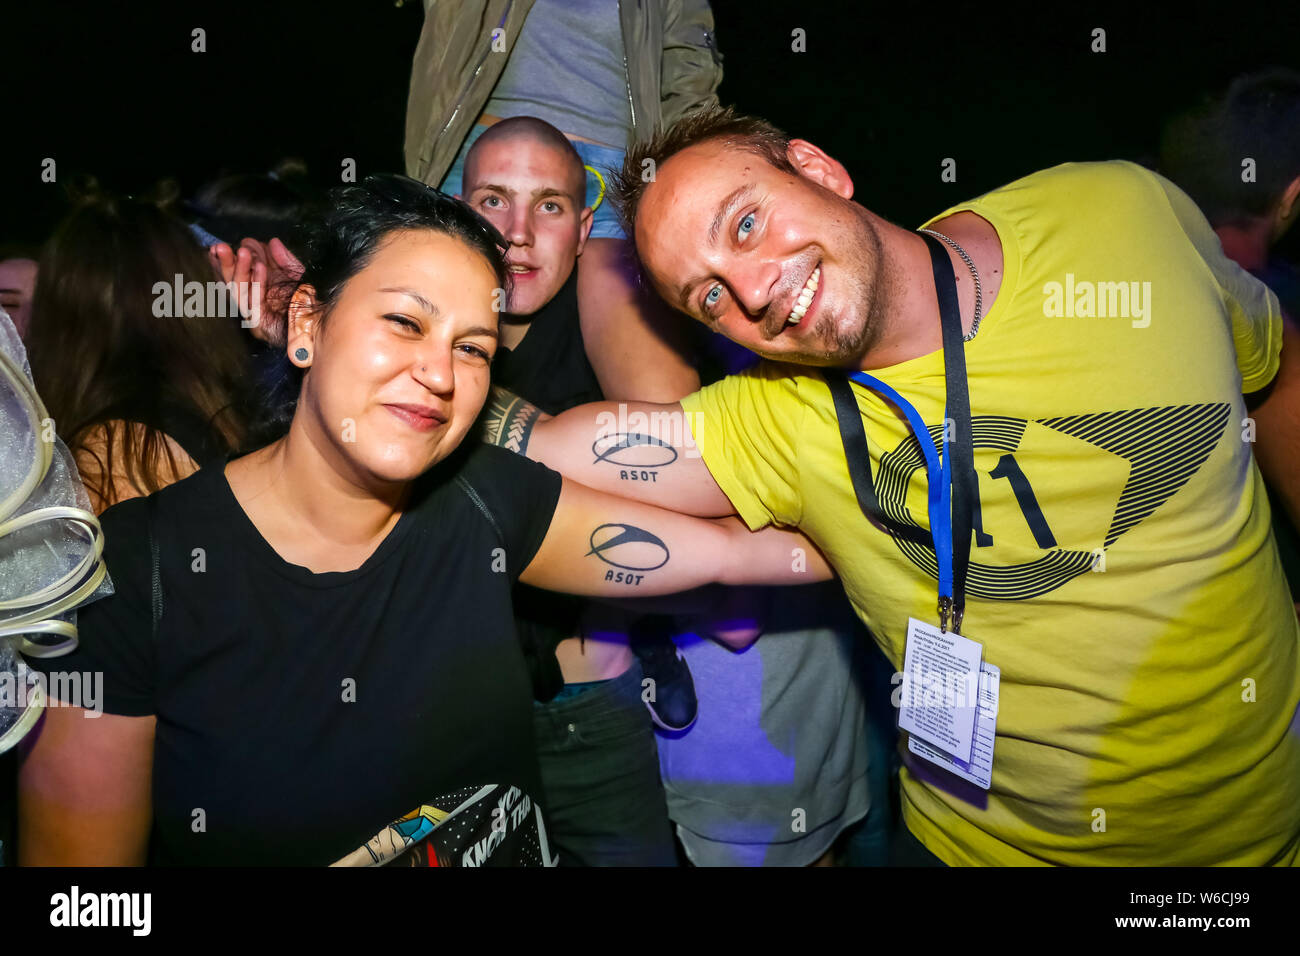 Brezje, Croatia - 19th July, 2019 : Audience during the Forestland, ultimate forest electronic music festival located in Brezje, Croatia. Stock Photo